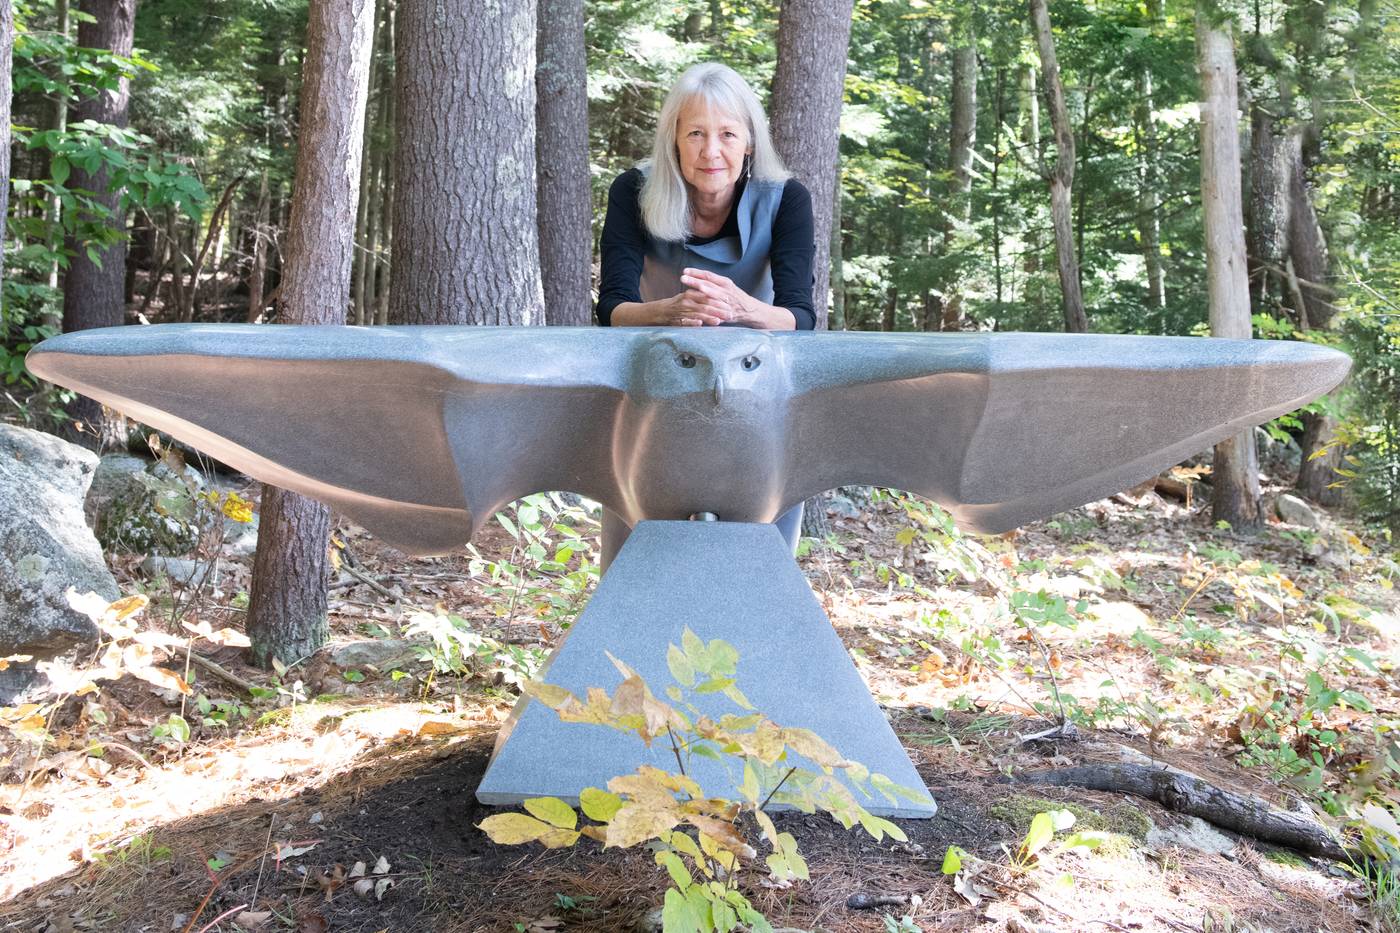 June in the In Libris tunic, leaning over the “Gliding Owl” sculpture by Andreas von Huene